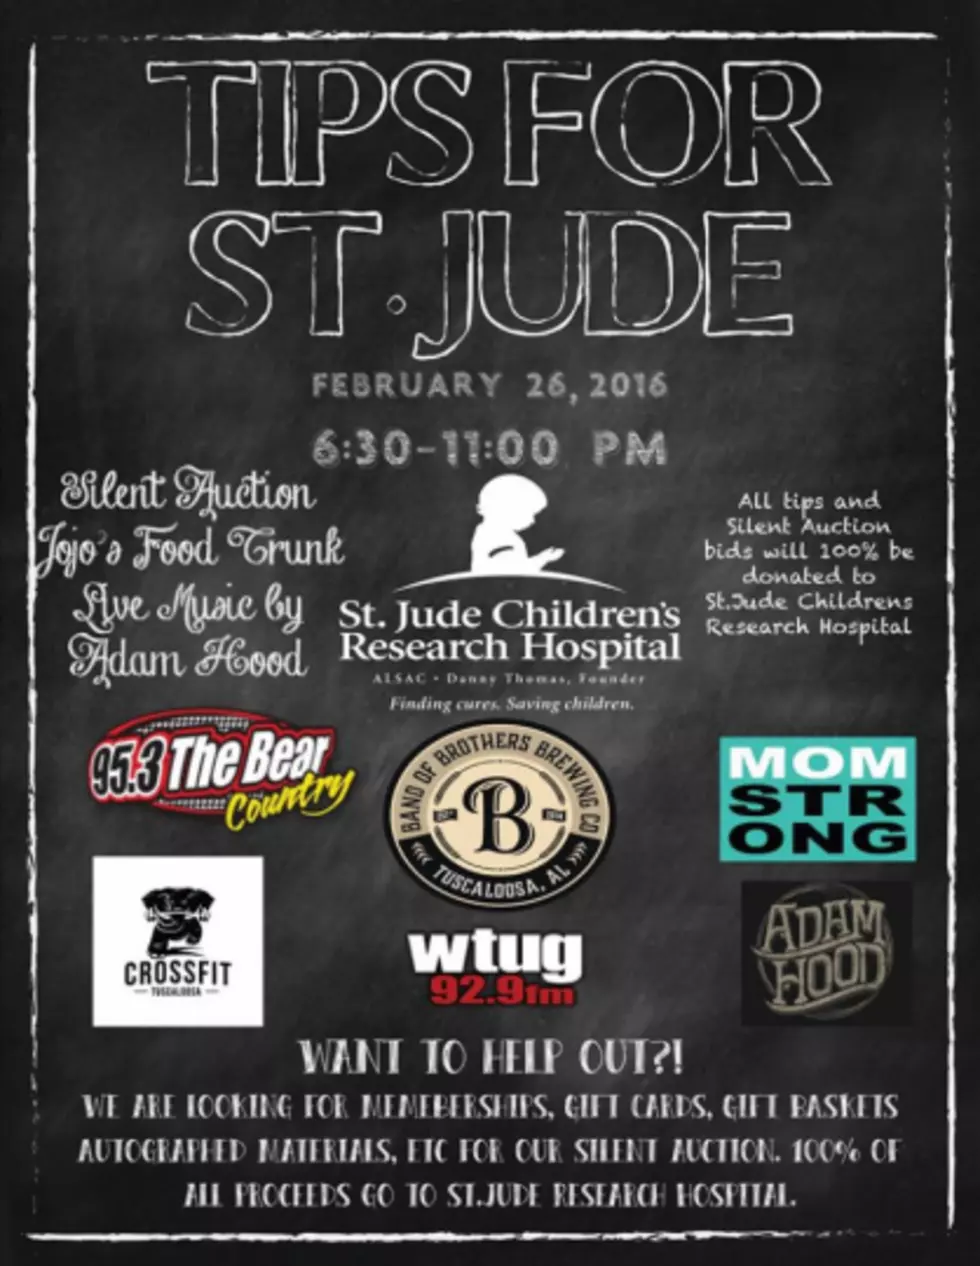 &#8216;Tips for St. Jude&#8217; Fundraising Event Coming in February